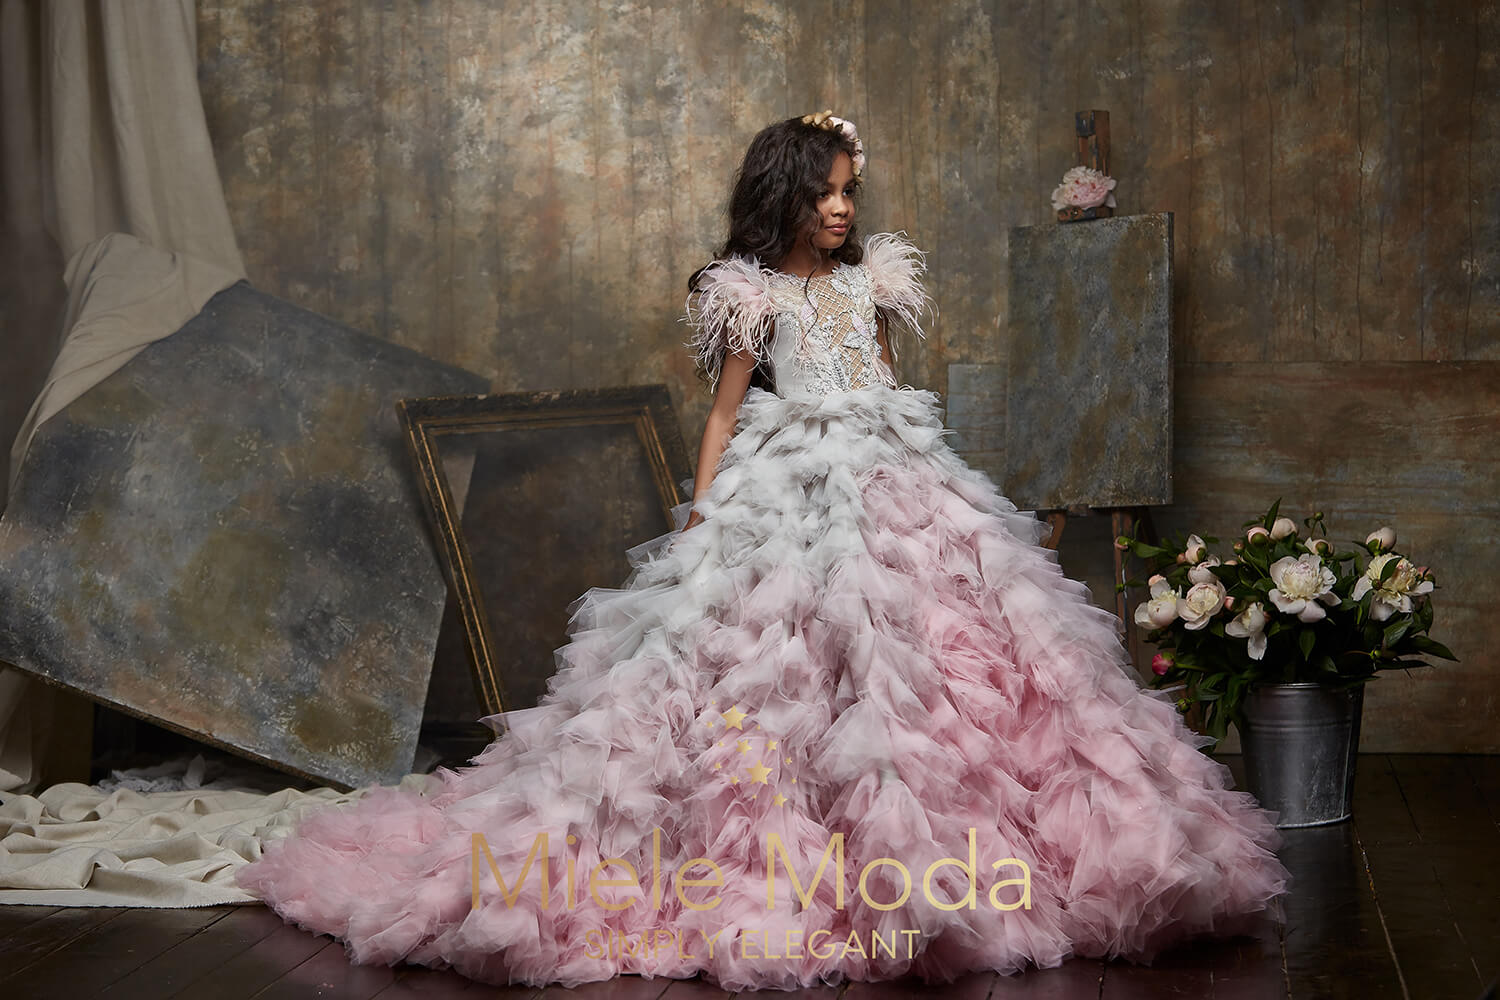 Pretty girl wearing Rosaline Flower Girl Couture Dress-by Miele Moda Boutique